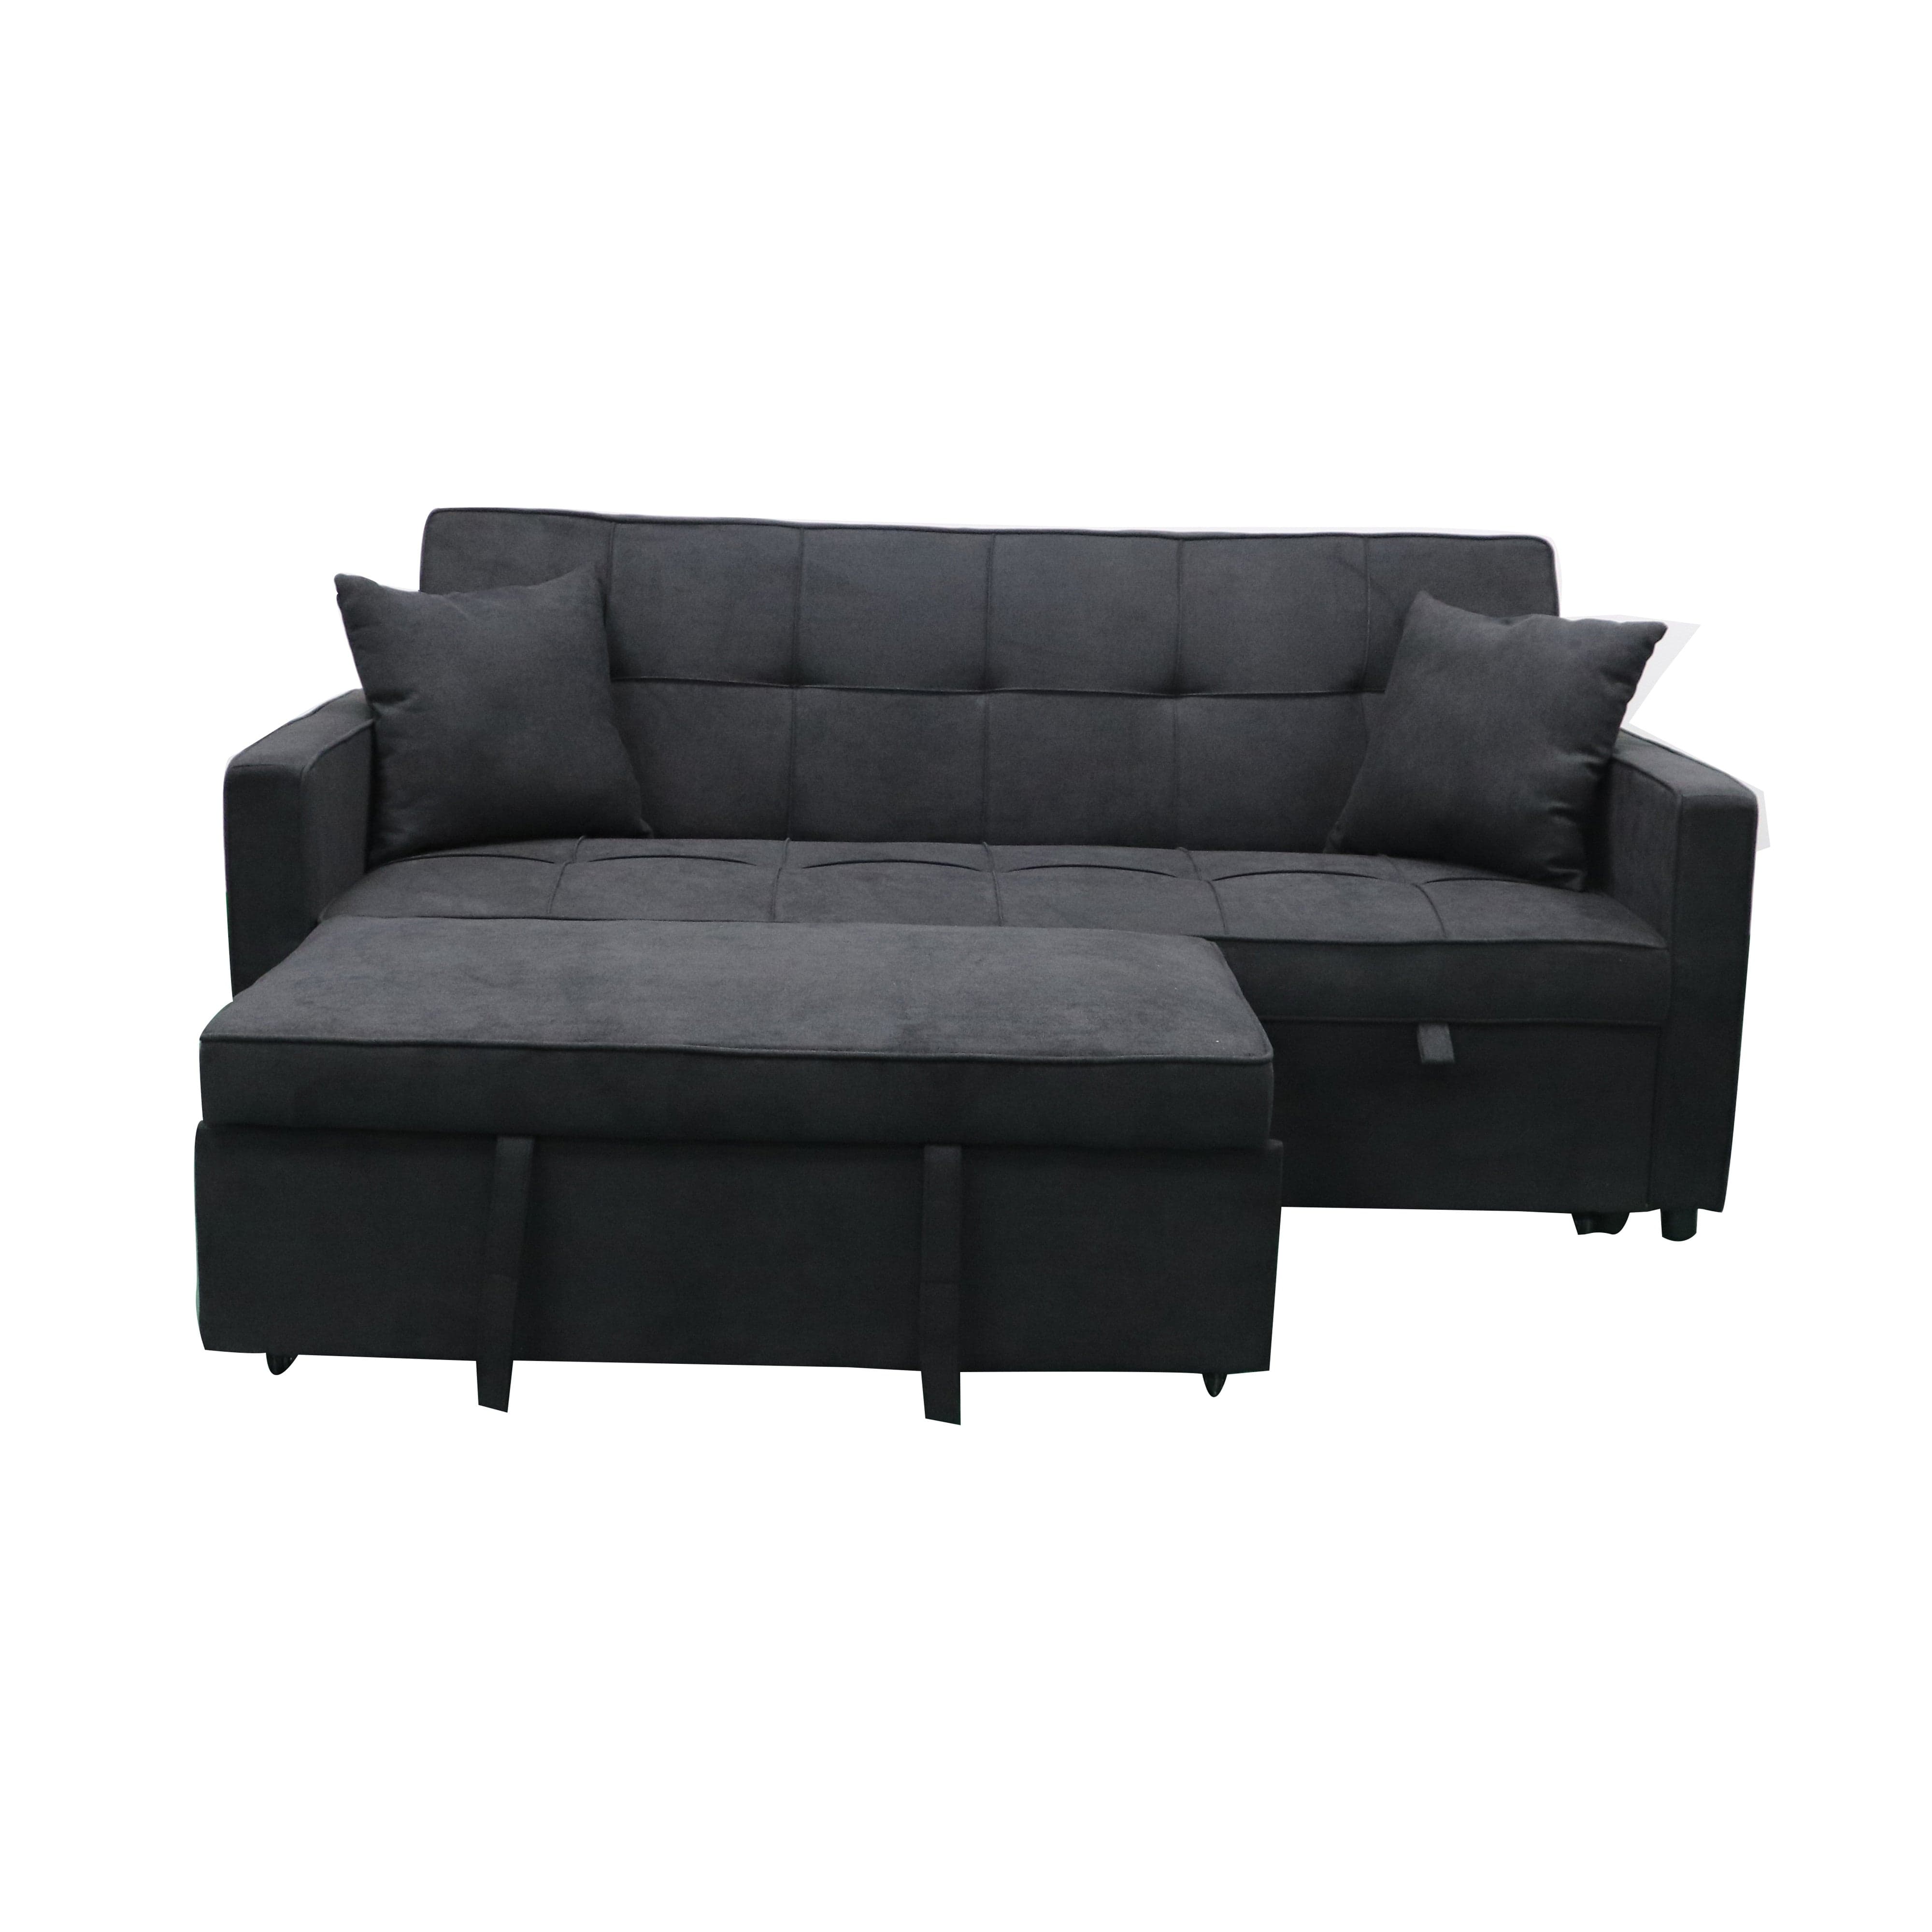 Multi-Functional Hartford Sofa Bed with Pullout Chaise - Black